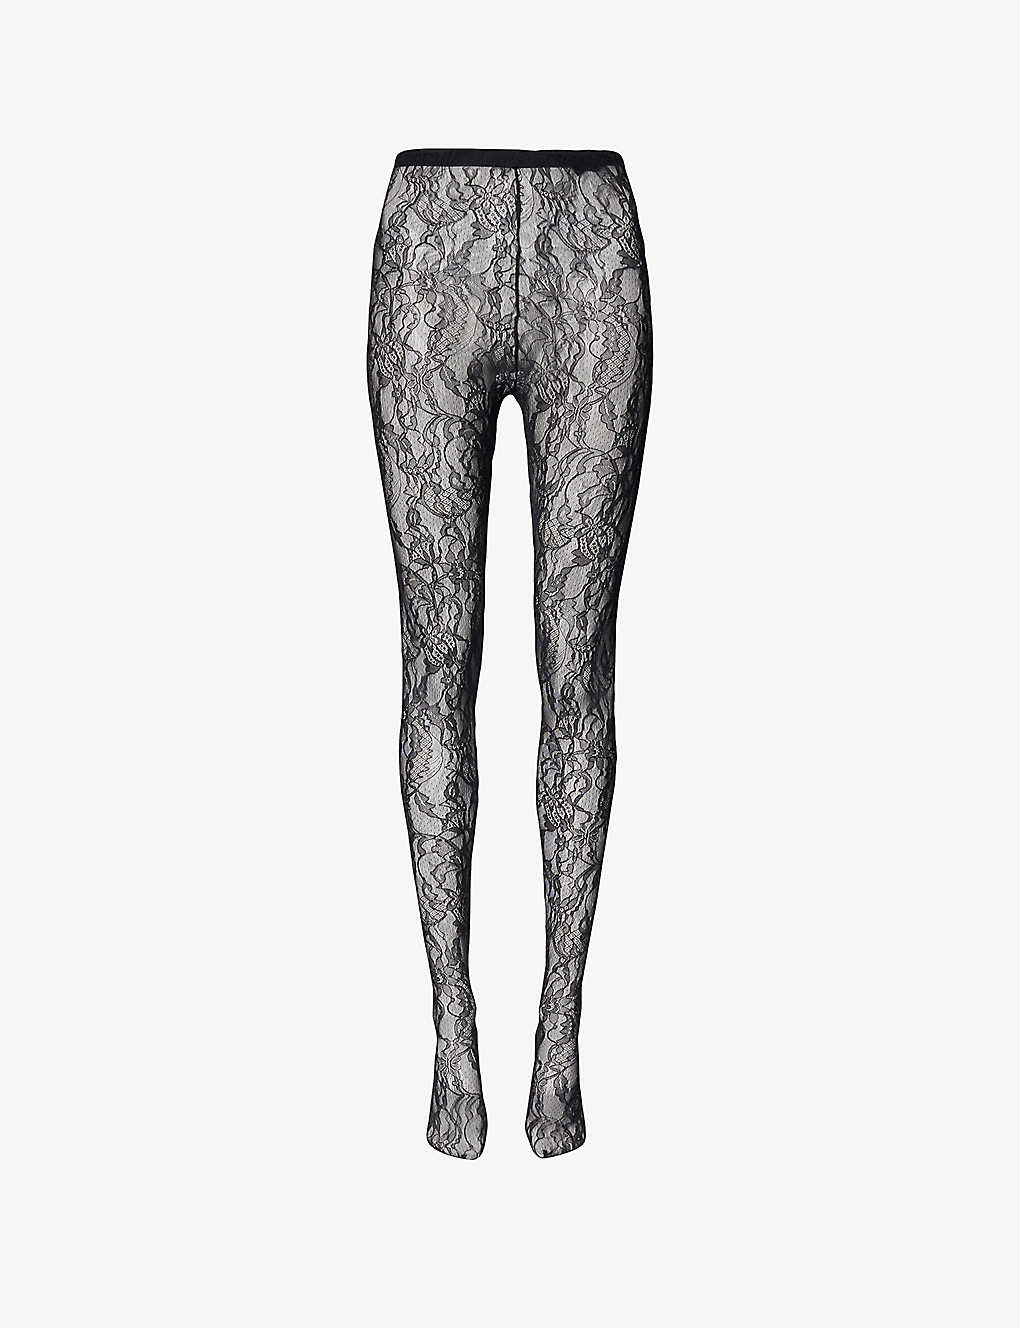 Wardrobe.nyc Womens Black High-rise Floral-lace Tights